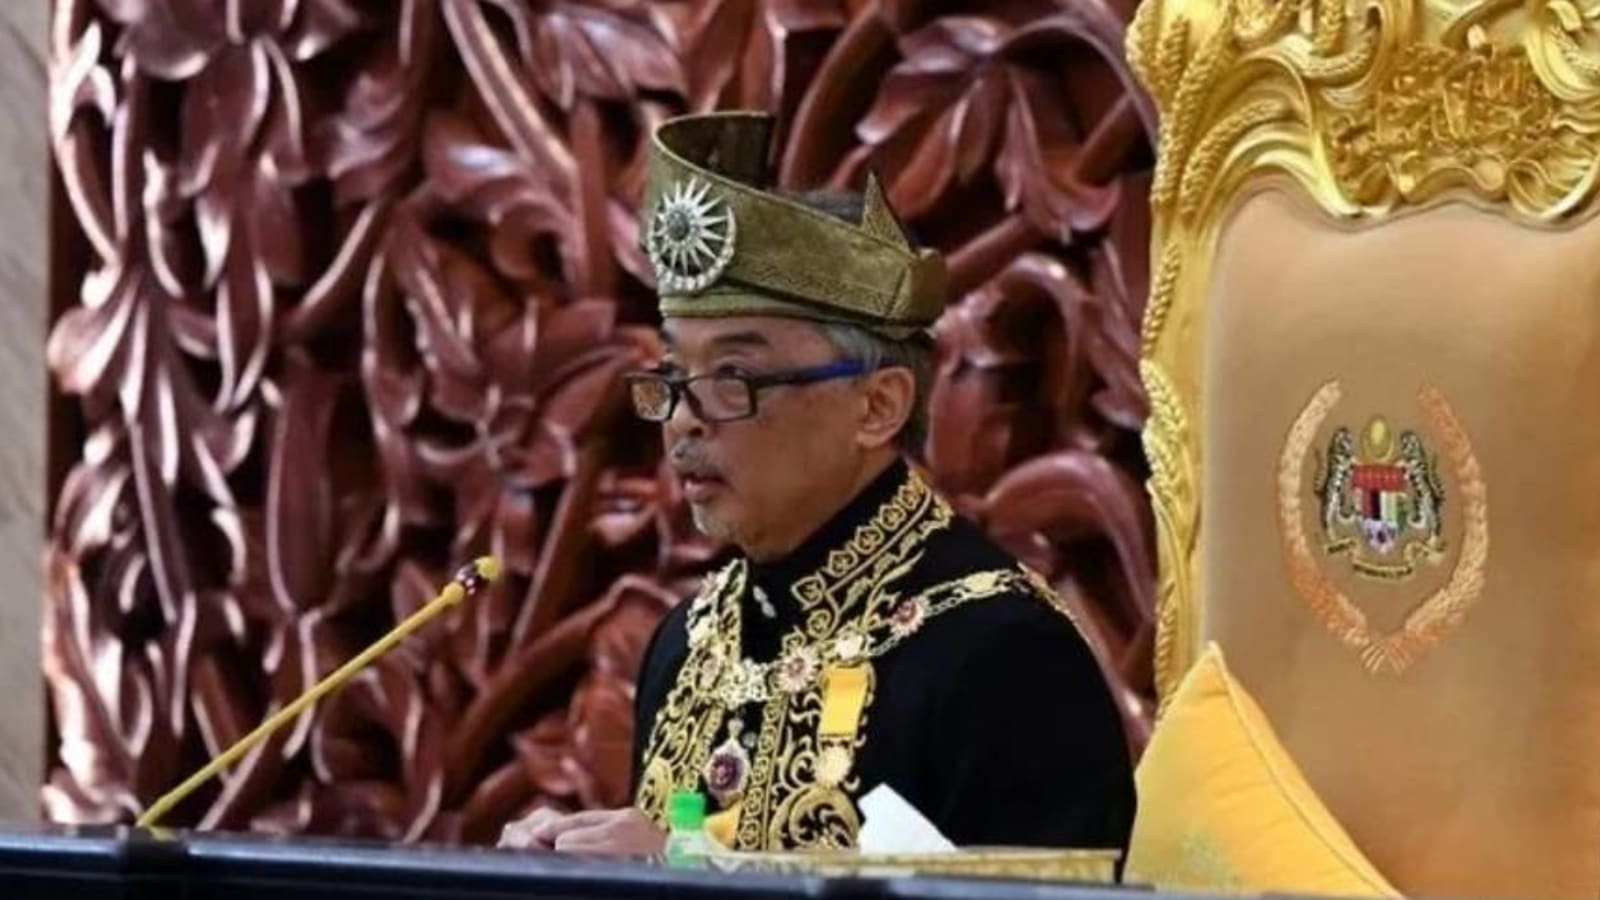 Malaysia's king undergoes follow-up treatment for previous health condition